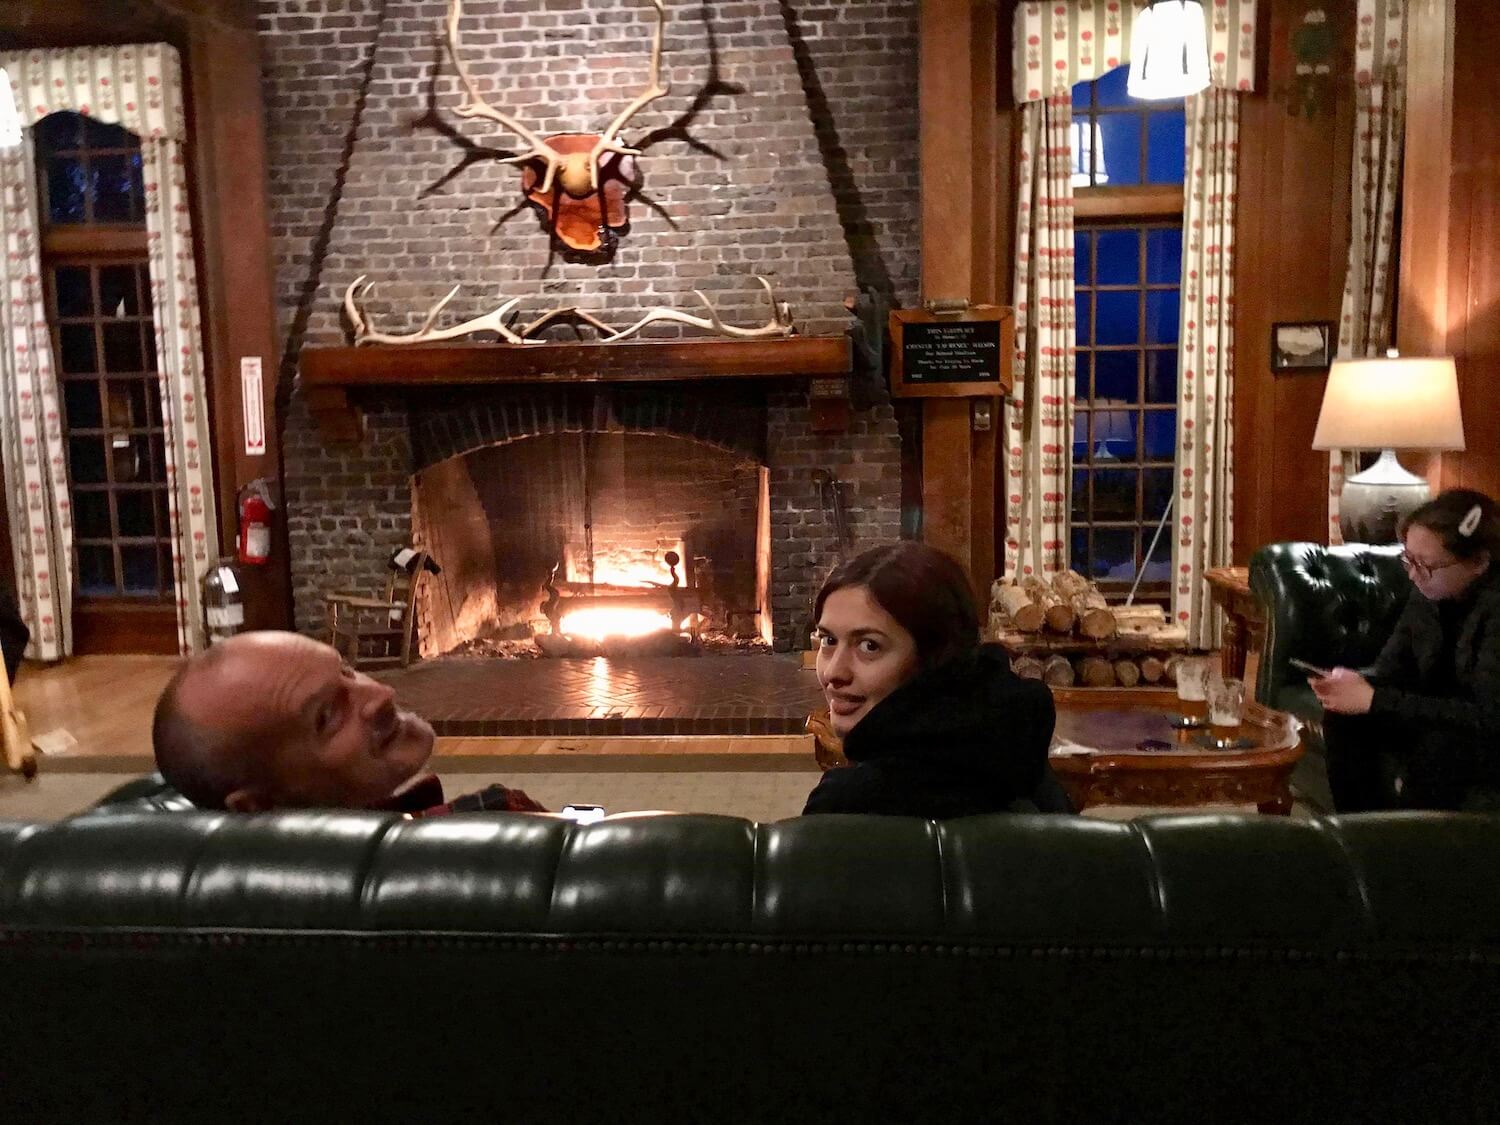 People relaxing on plush green leather couches in front of a grand fireplace inside a lodge. There are Roosevelt Deer antlers on the mantle of the fireplace and also hanging on the stone chimney.